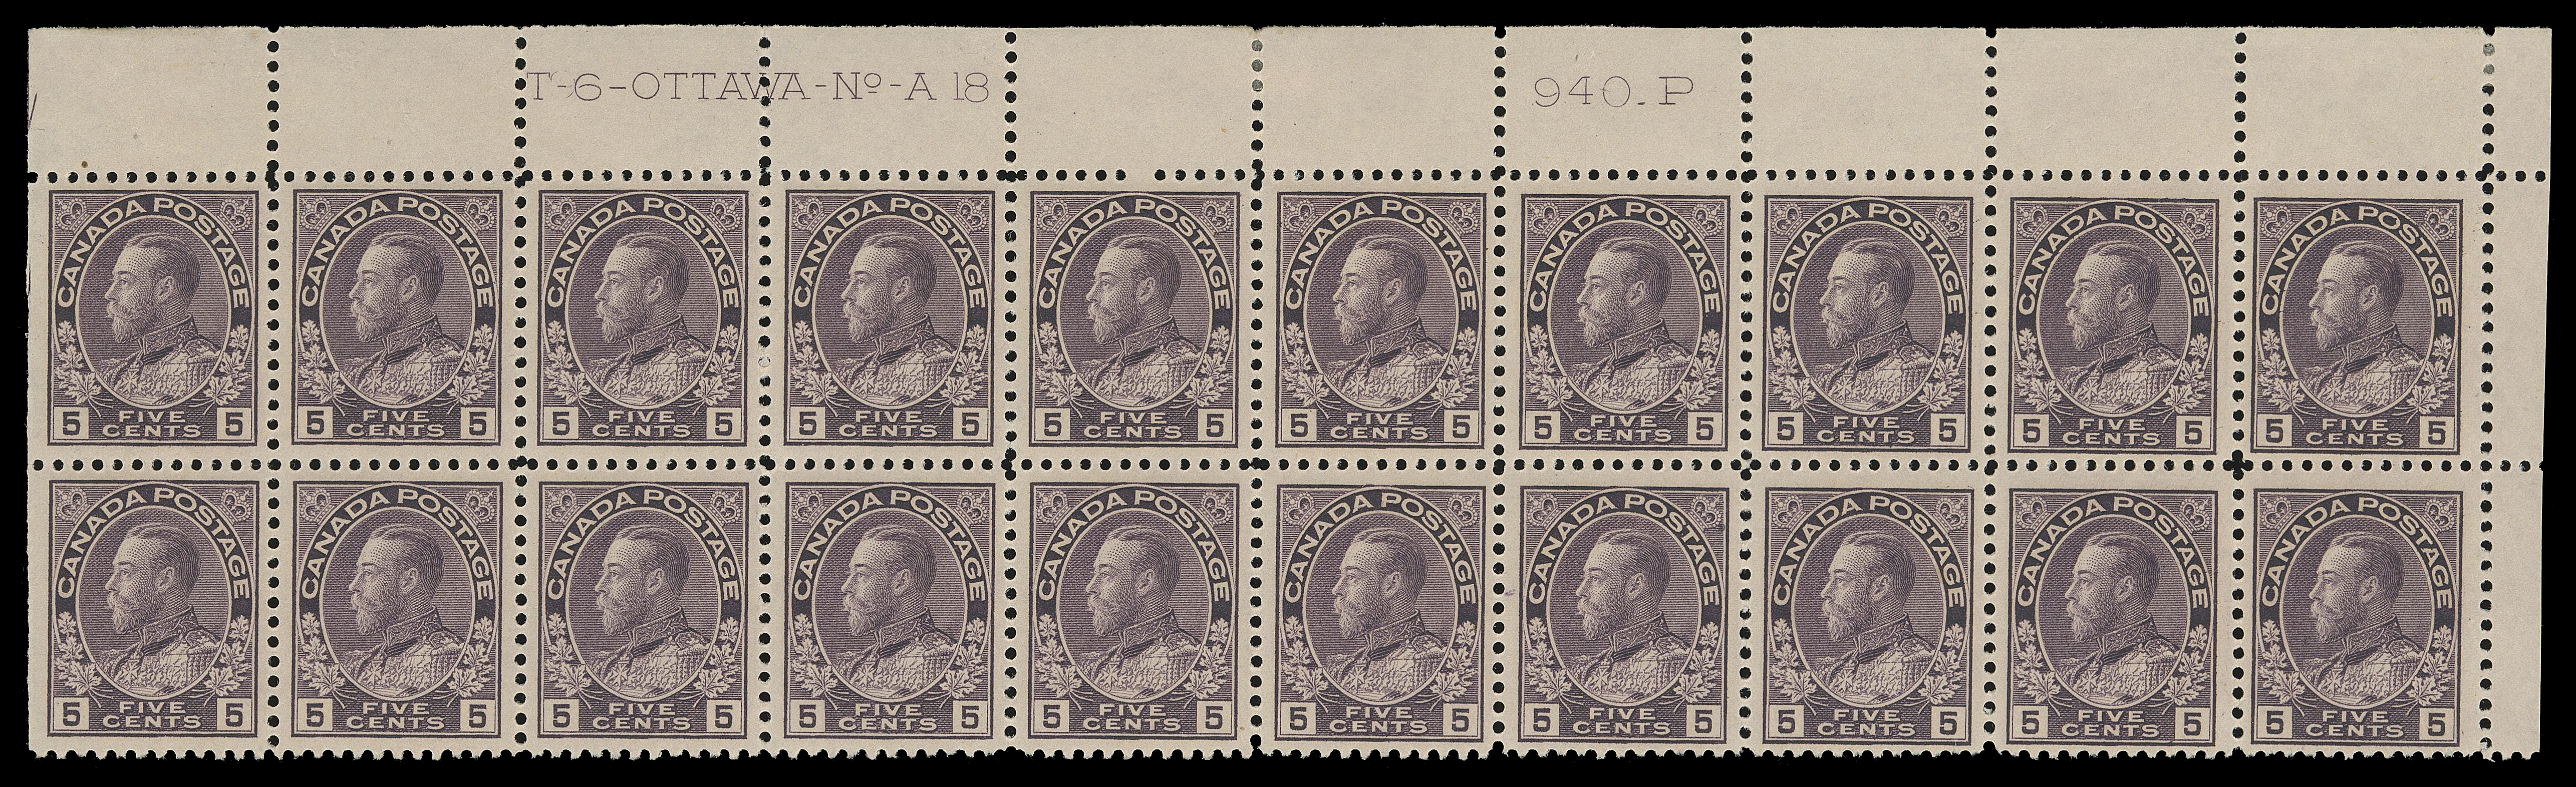 ADMIRAL STAMPS  112ii,A remarkably fresh Plate 18 block of twenty from the upper right pane position, fabulous colour, quite well centered, light natural gum skips along fifth and seventh columns, LH in selvedge and trace of hinging on top left straight edged stamp, nineteen stamps with full NH original gum, VF (Unitrade cat. $3,480)